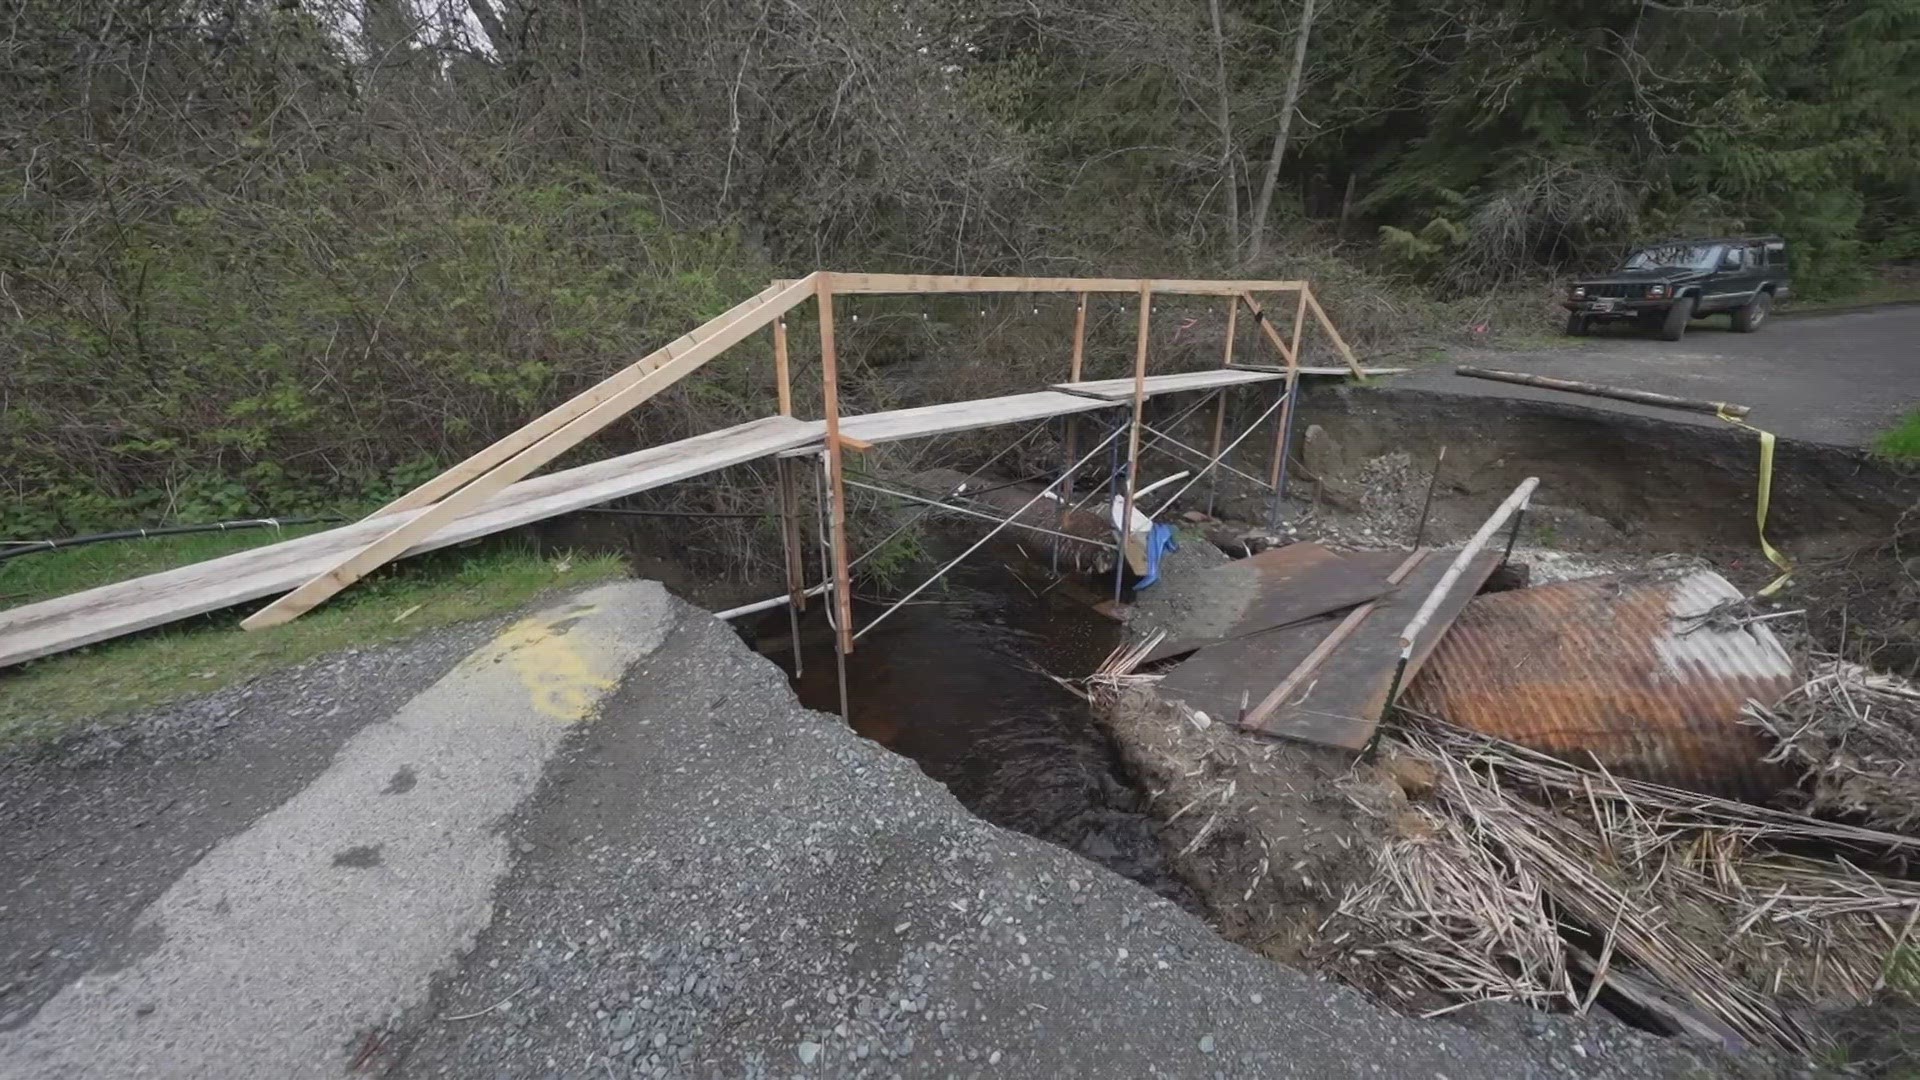 For five weeks, the group of 23 residents has had to travel by foot over rushing waters.